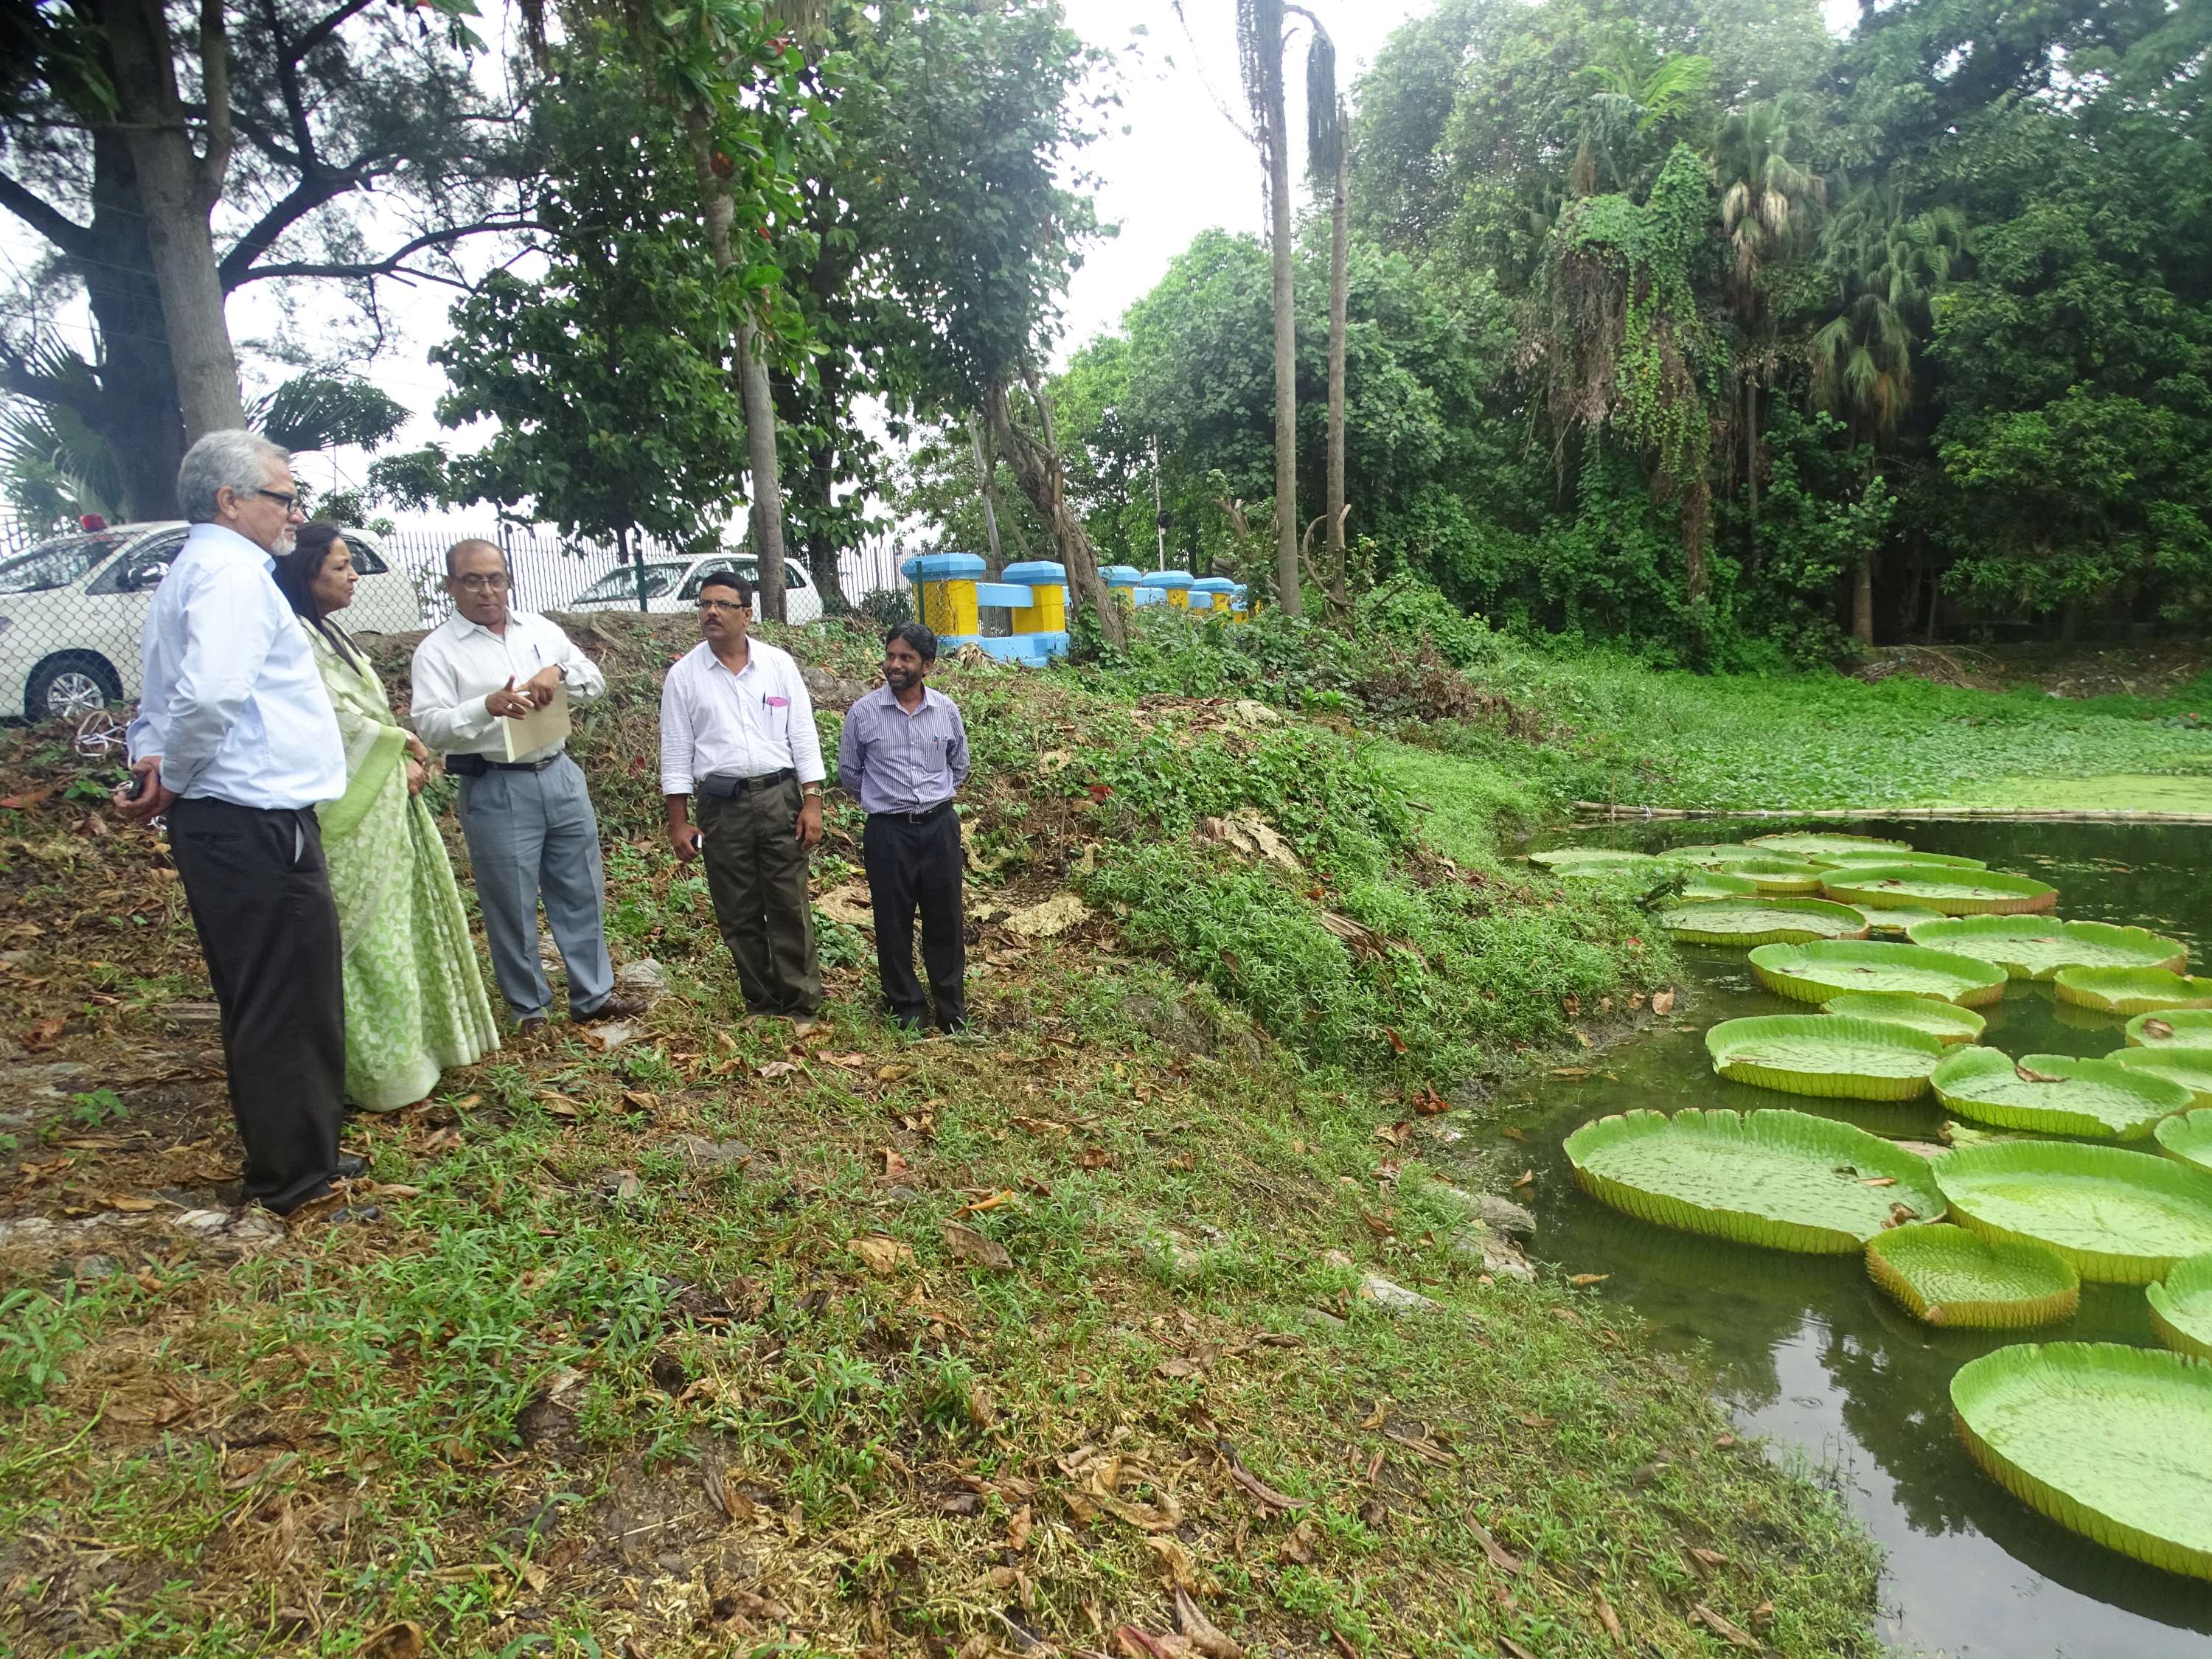 Addl. Secretary viewing Giant Water Lily